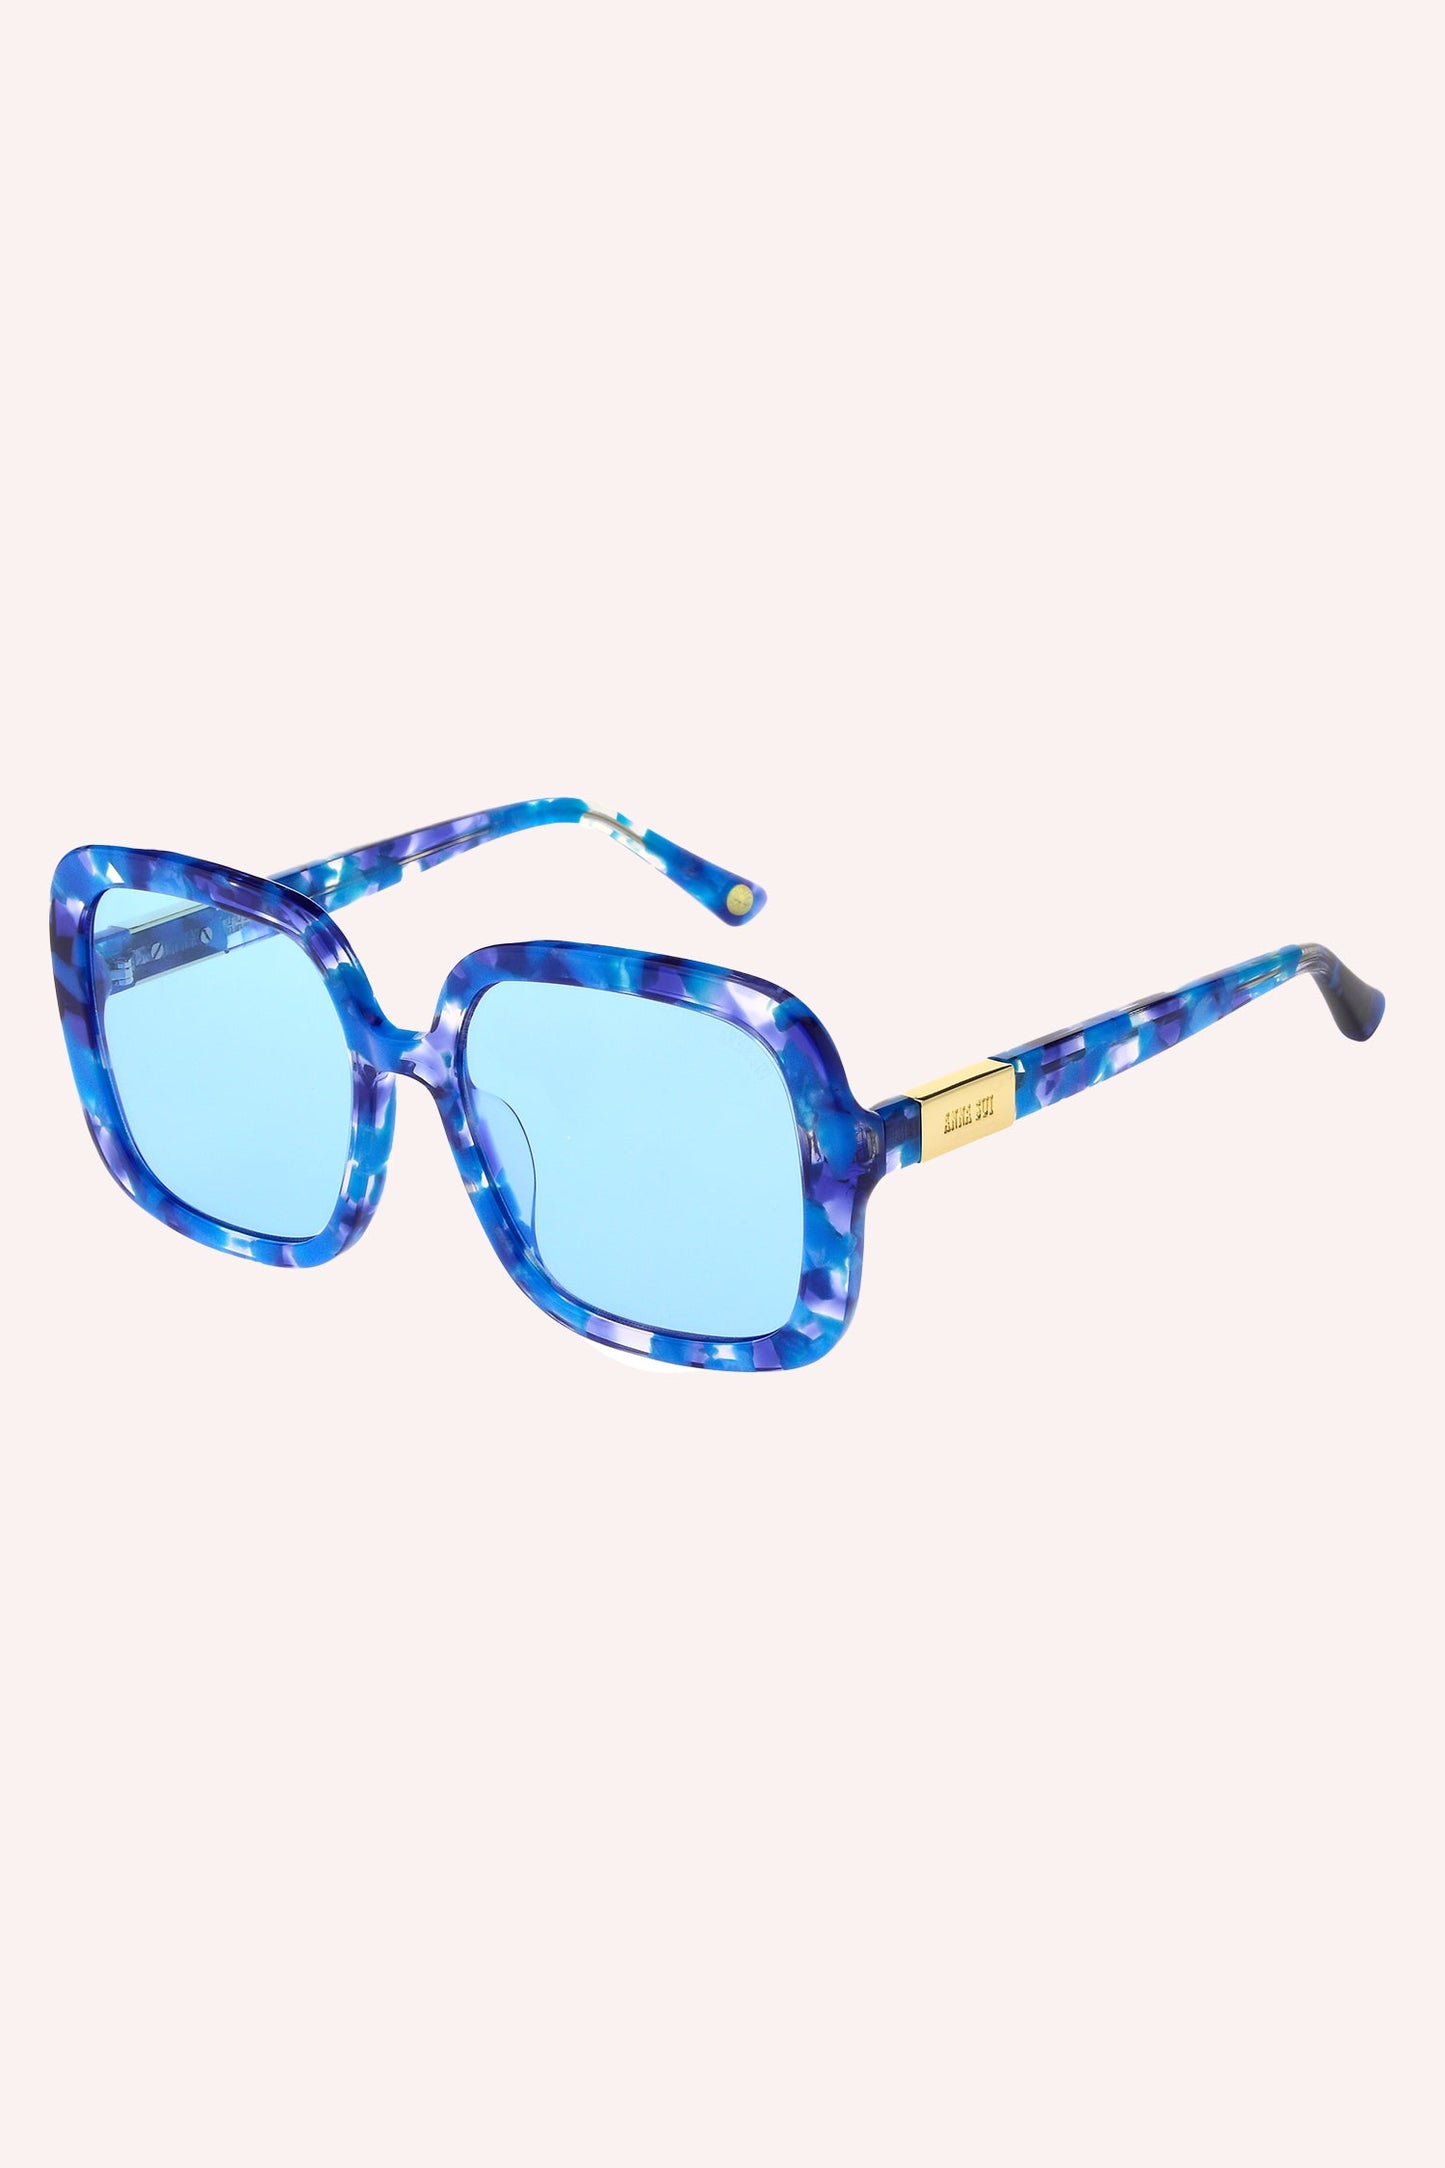 Square Sunglasses Turquoise, blue frames white spots, turquoise glasses, Anna Sui on branches